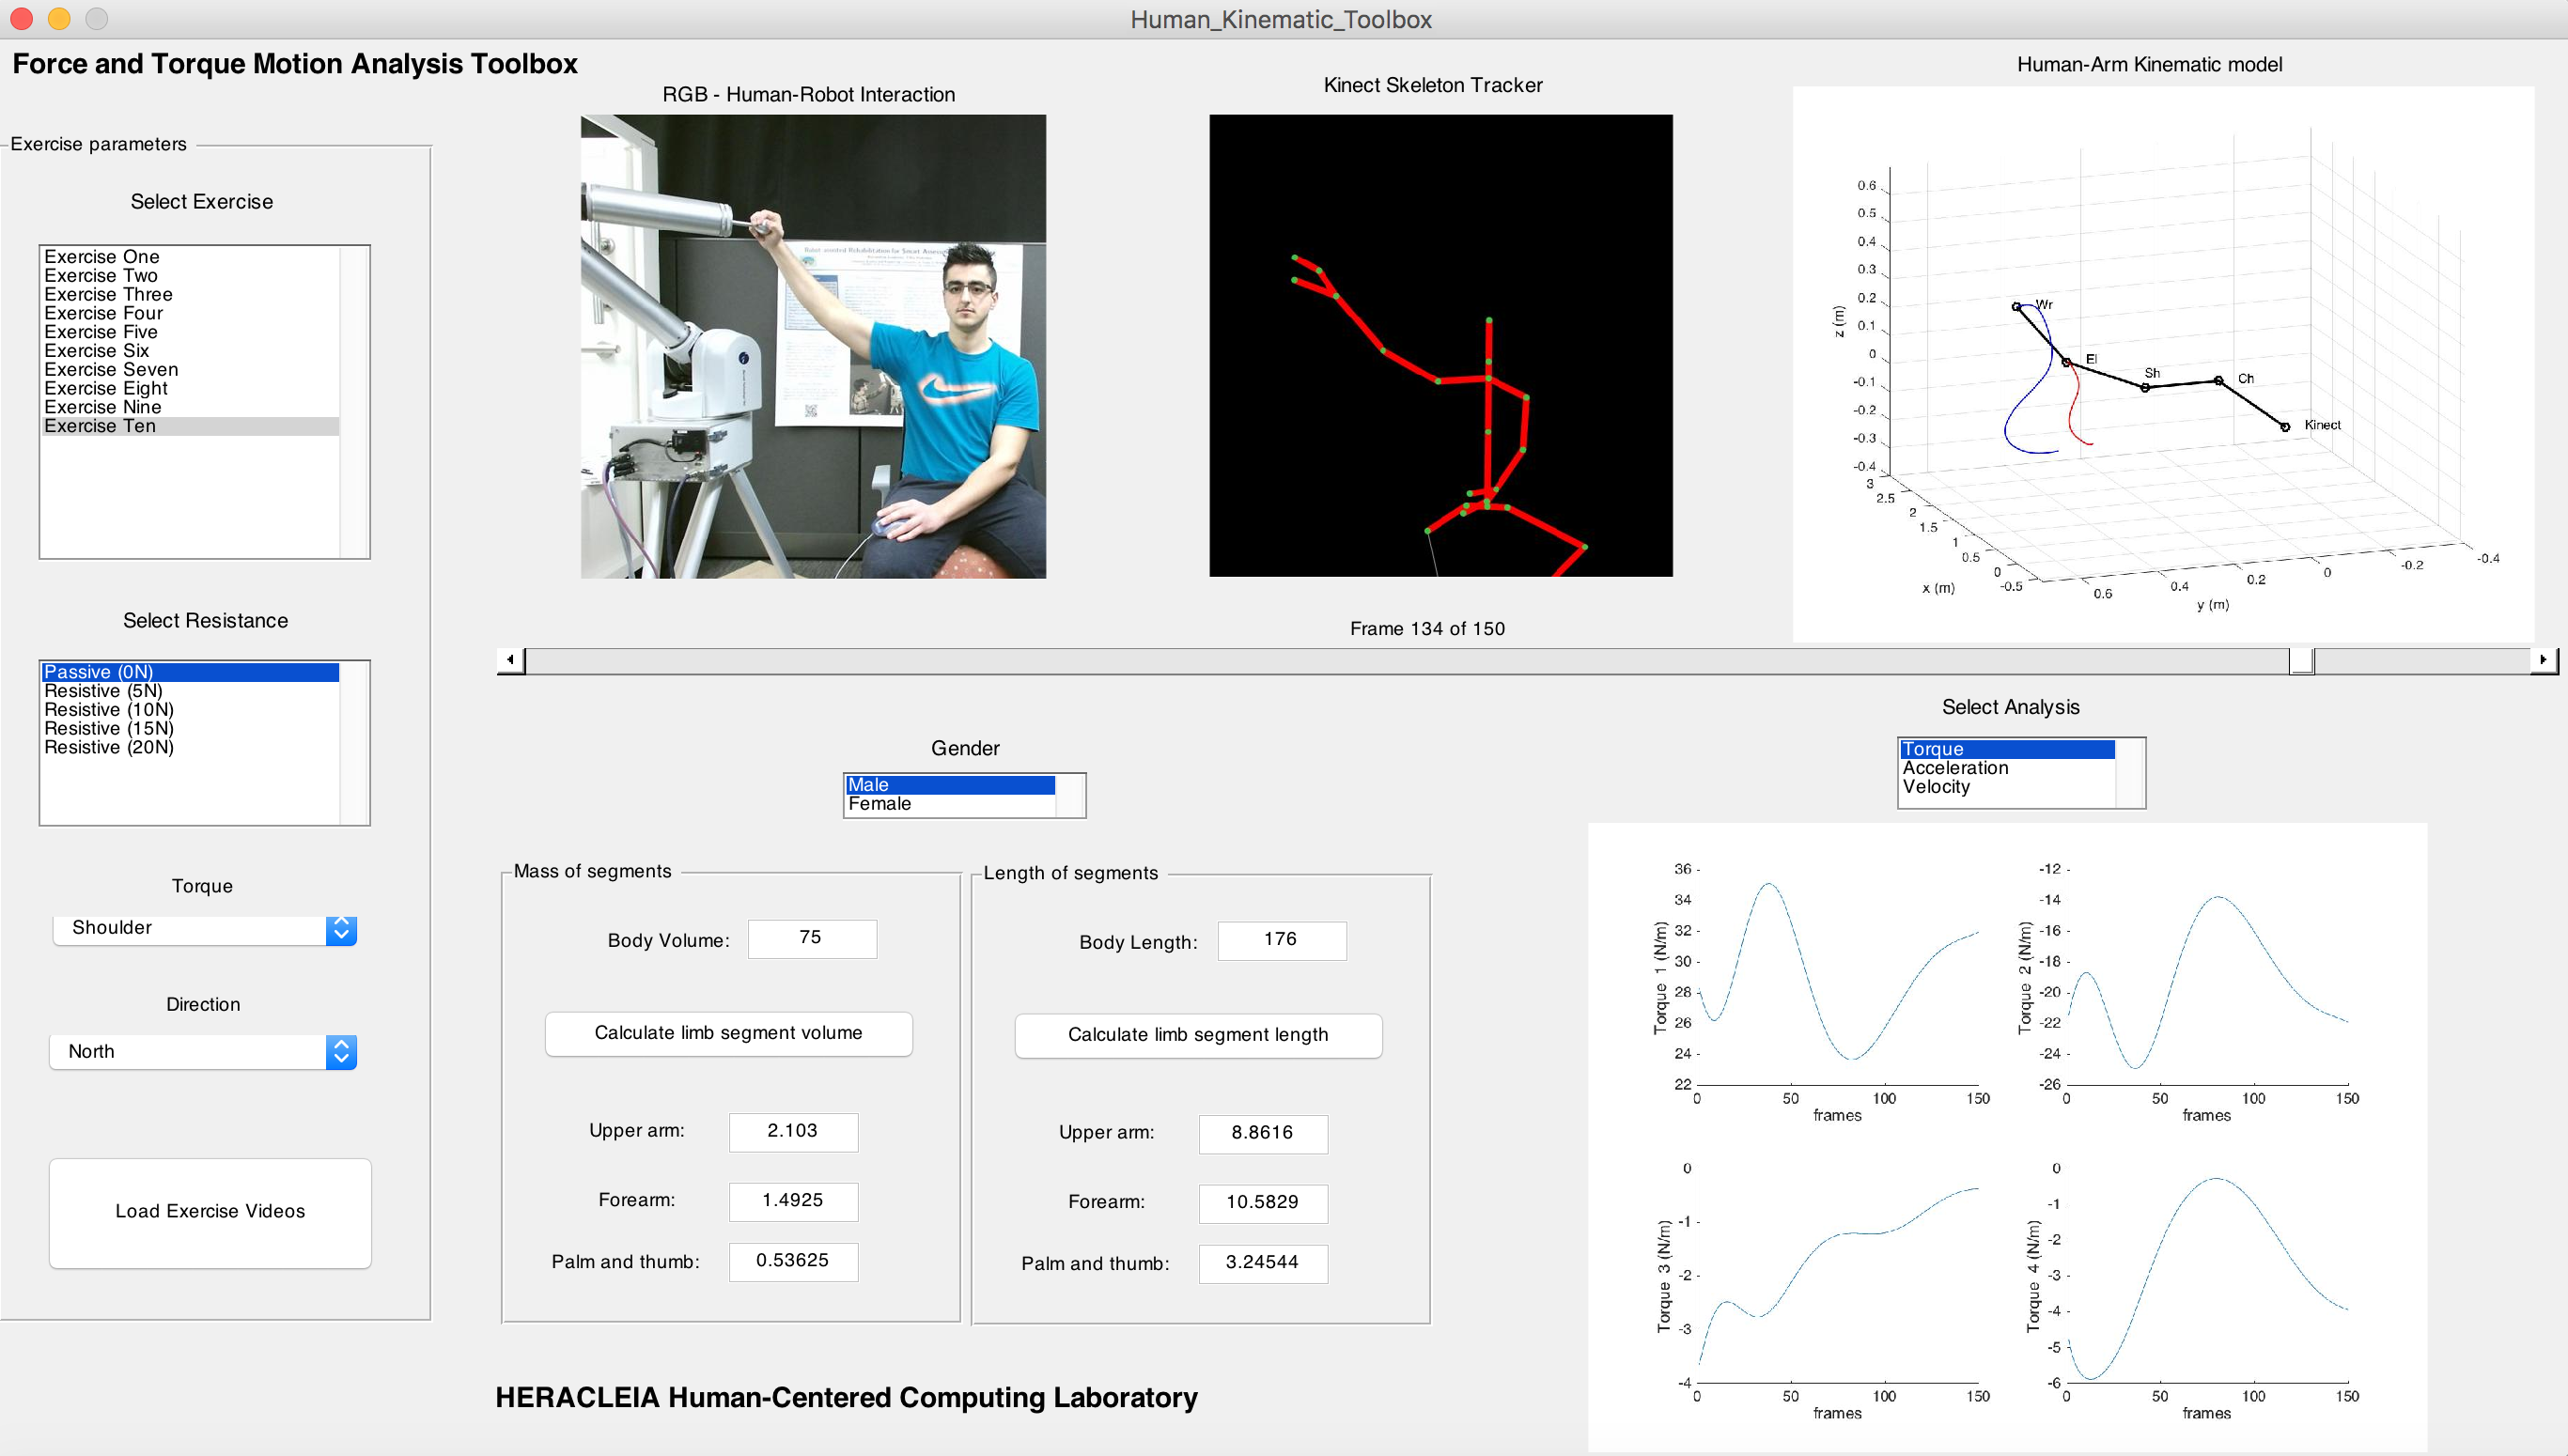 Motion and Force Analysis Toolbox